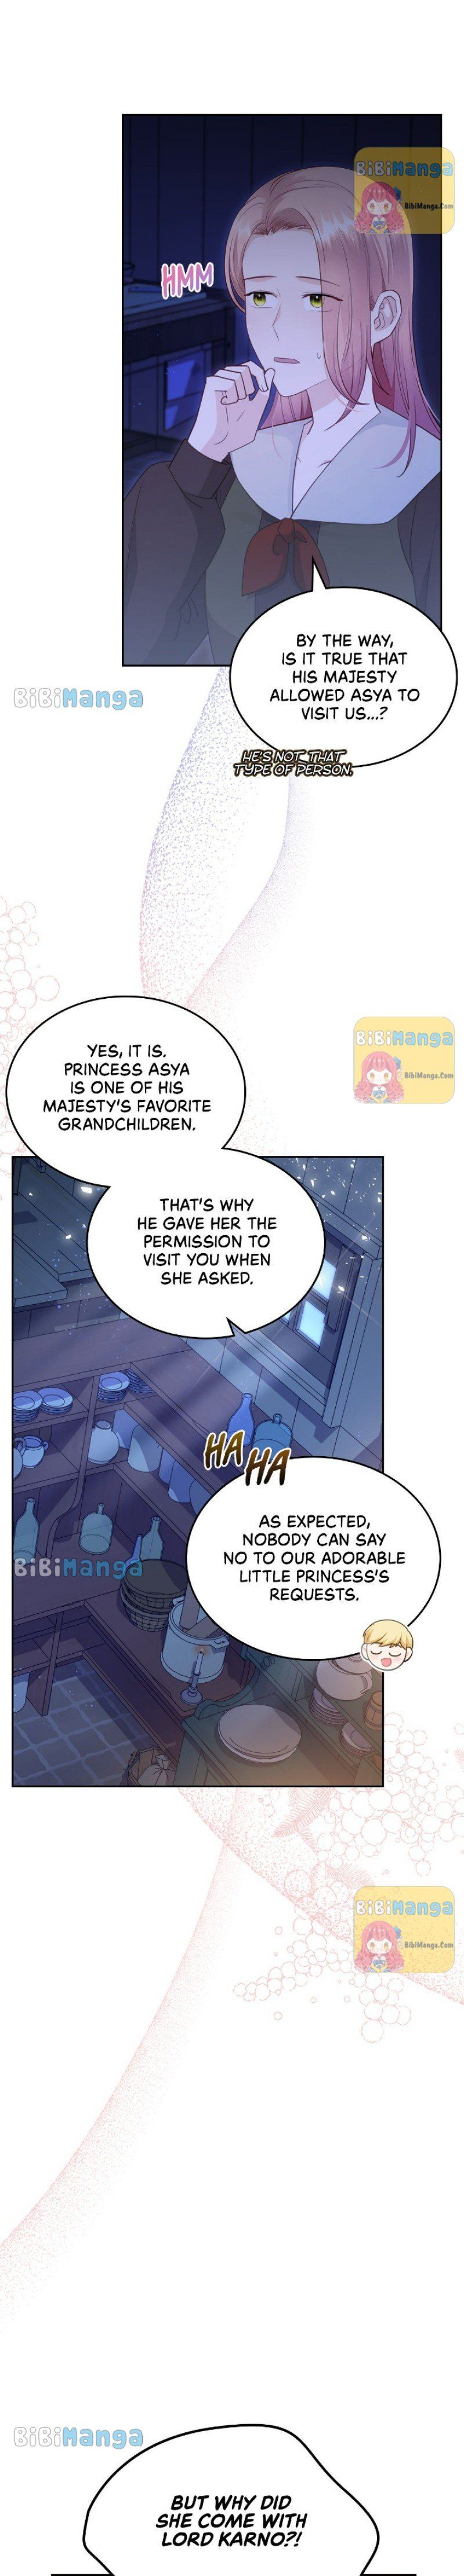 The Villainous Princess Wants To Live In A Gingerbread House Chapter 82 page 3 - MangaWeebs.in